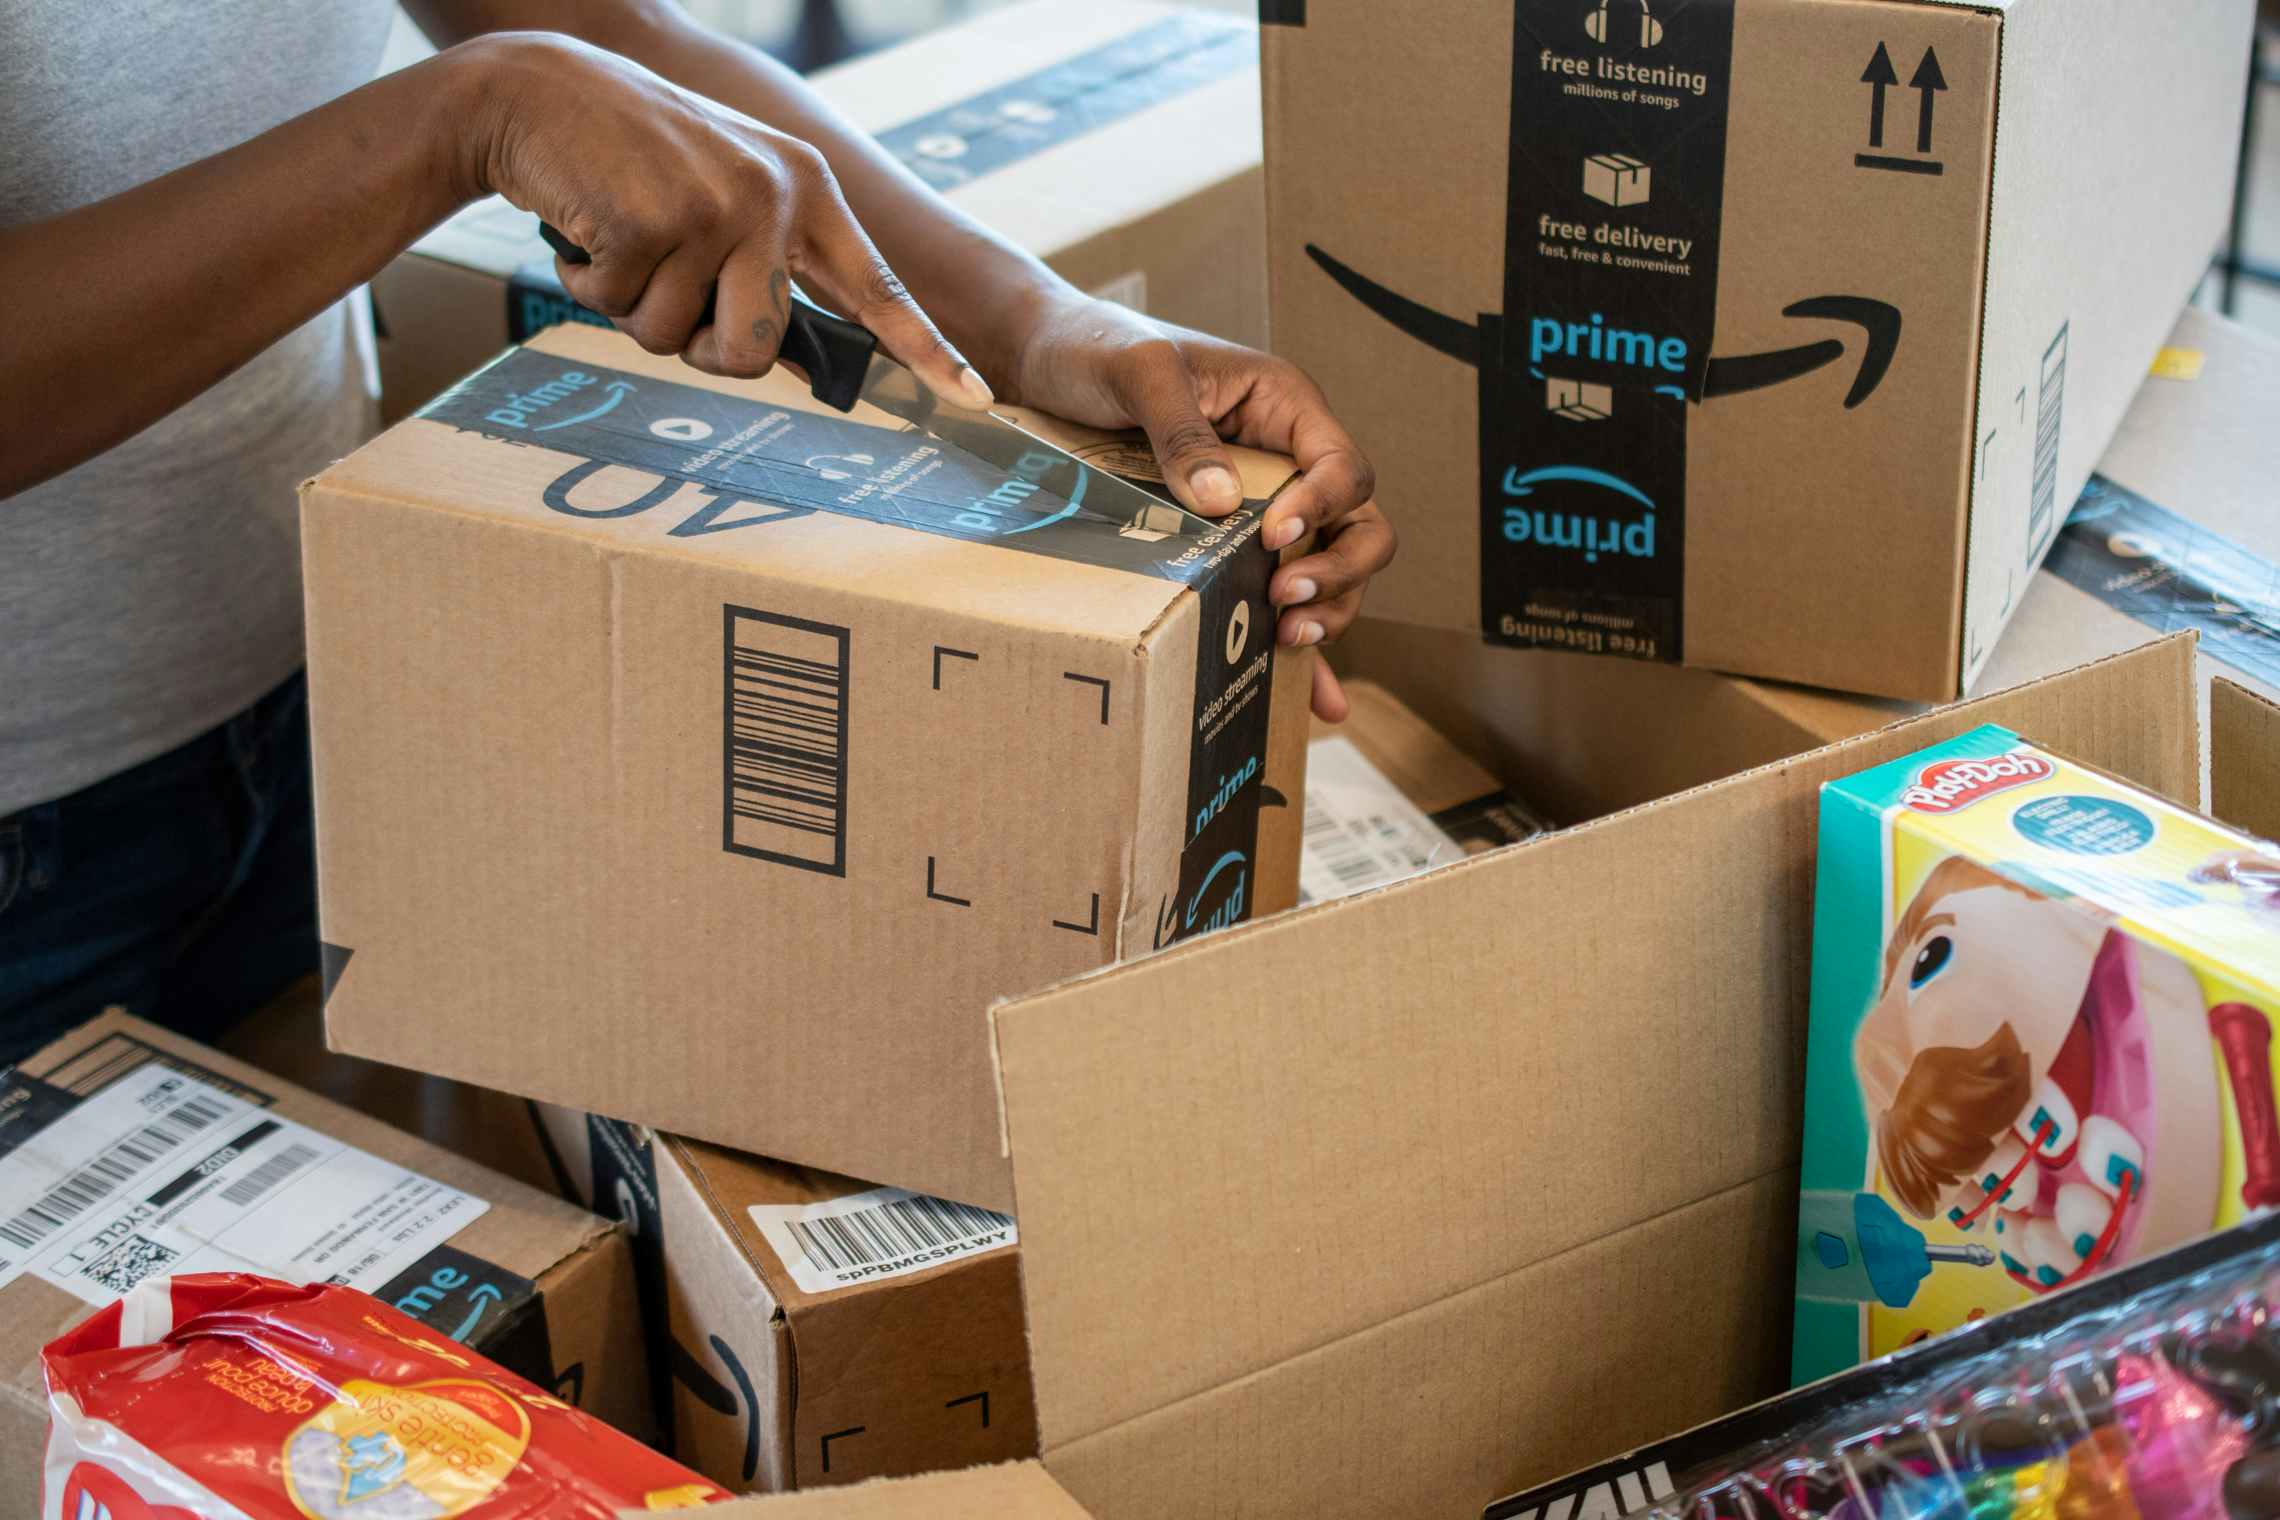 A woman's hands opening an Amazon box with a knife, with more Amazon boxes on the table.